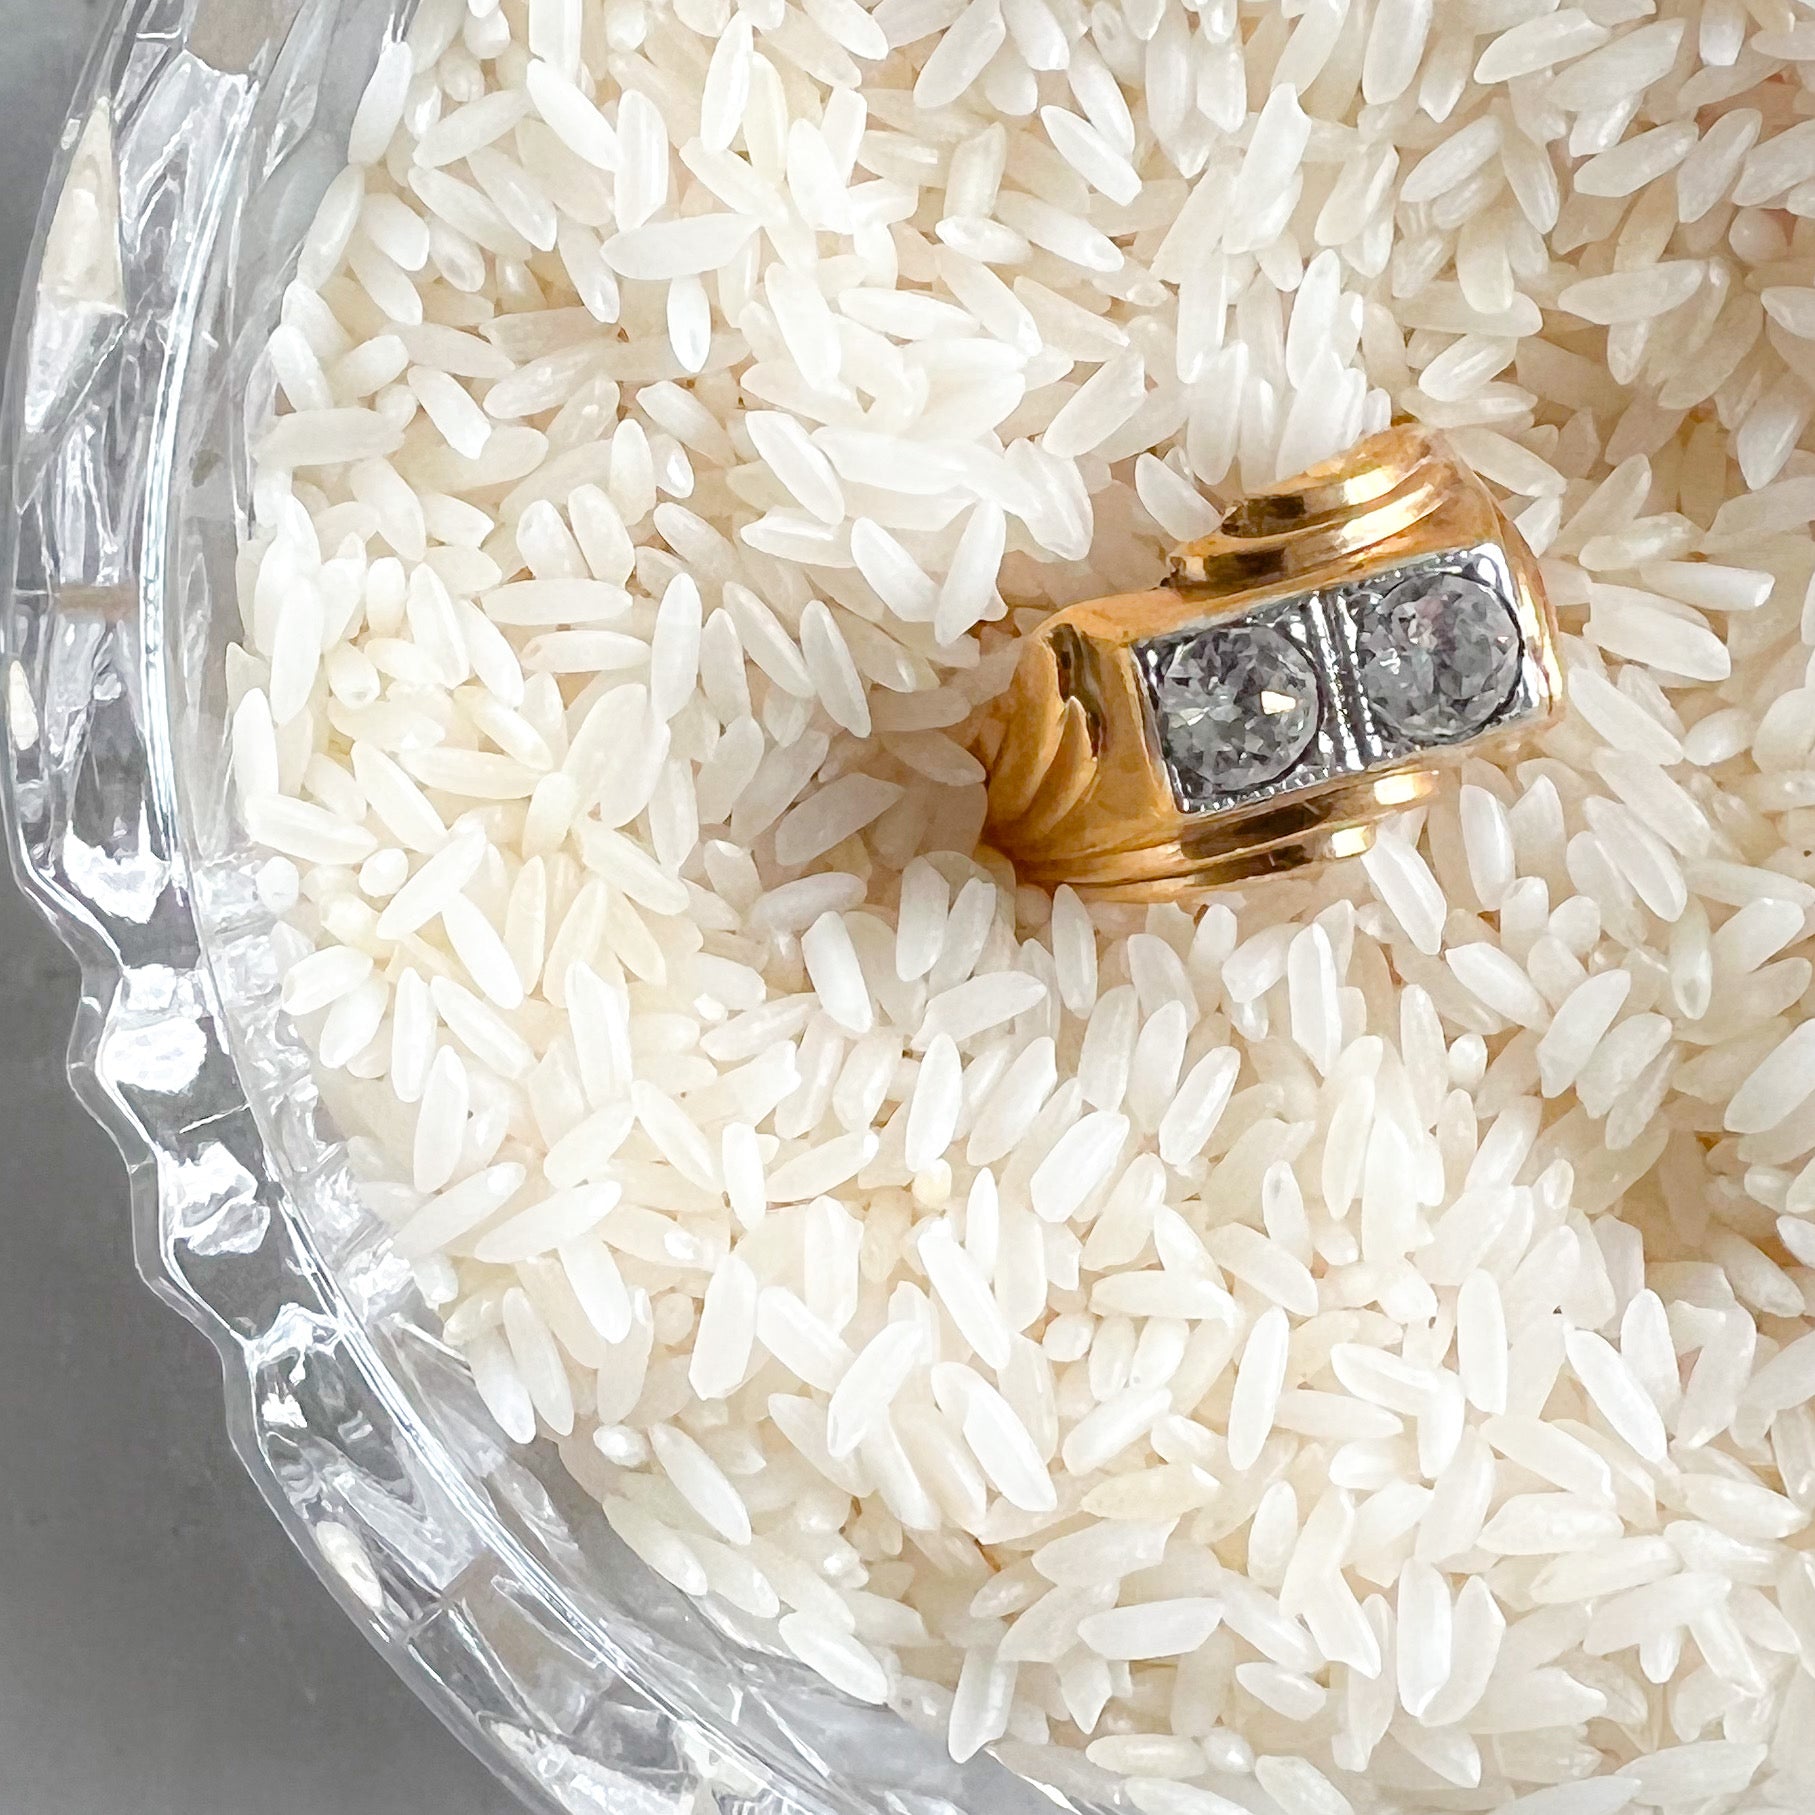 Dice Unisex Gold Crystal Ring - BelleStyle